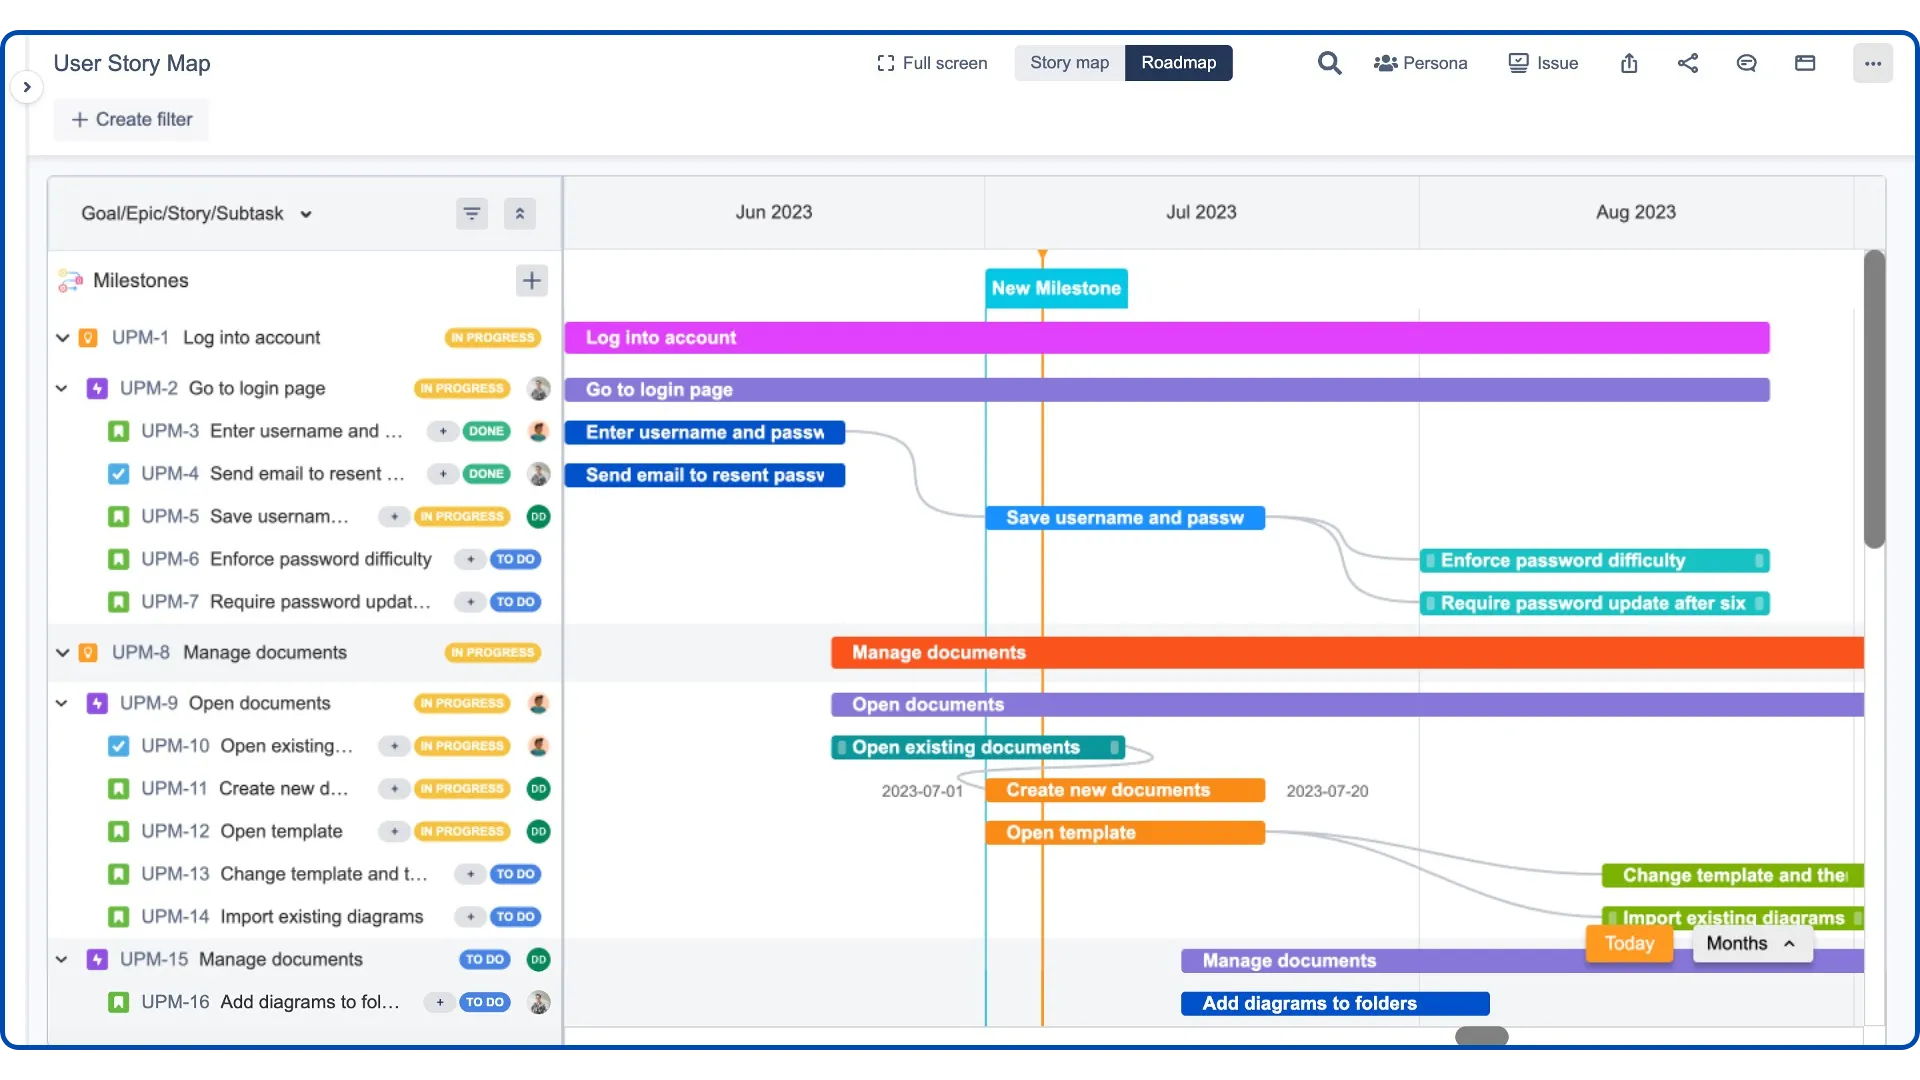 Roadmap feature of Agile User Story Map and Roadmap for Jira